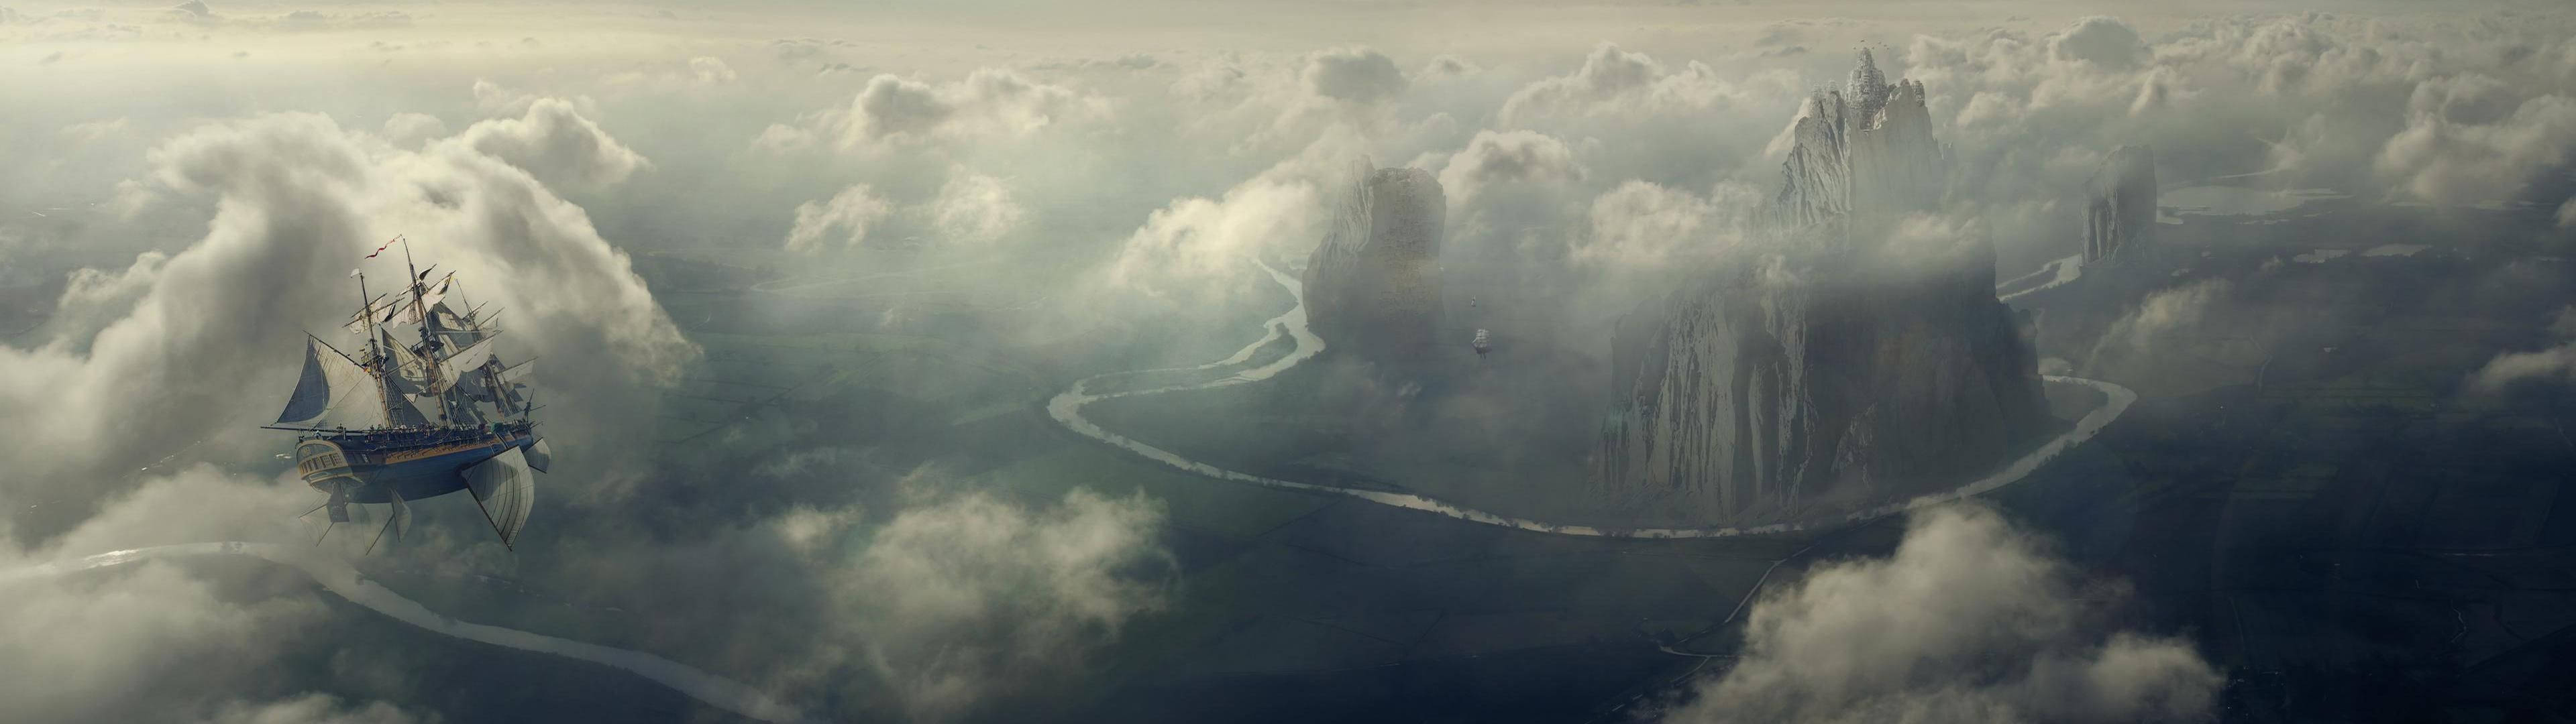 Clouds And Floating Ship Dual Monitor Wallpaper